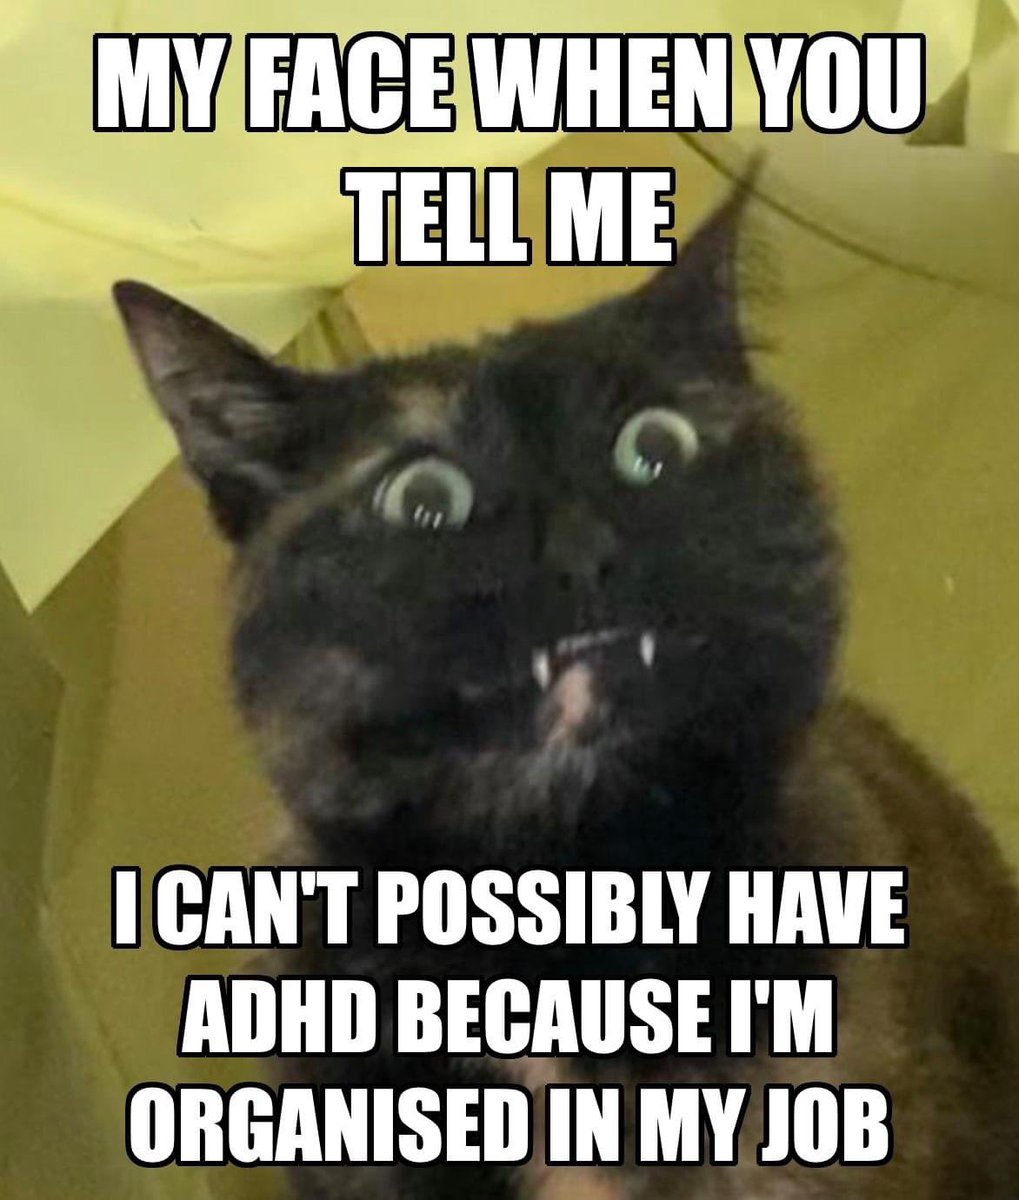 🔔 SHARE 🔔 TO SPREAD AWARENESS OF ADHD MYTHS!
😸 #adhdmyths #adhd #actionindistraction 😸